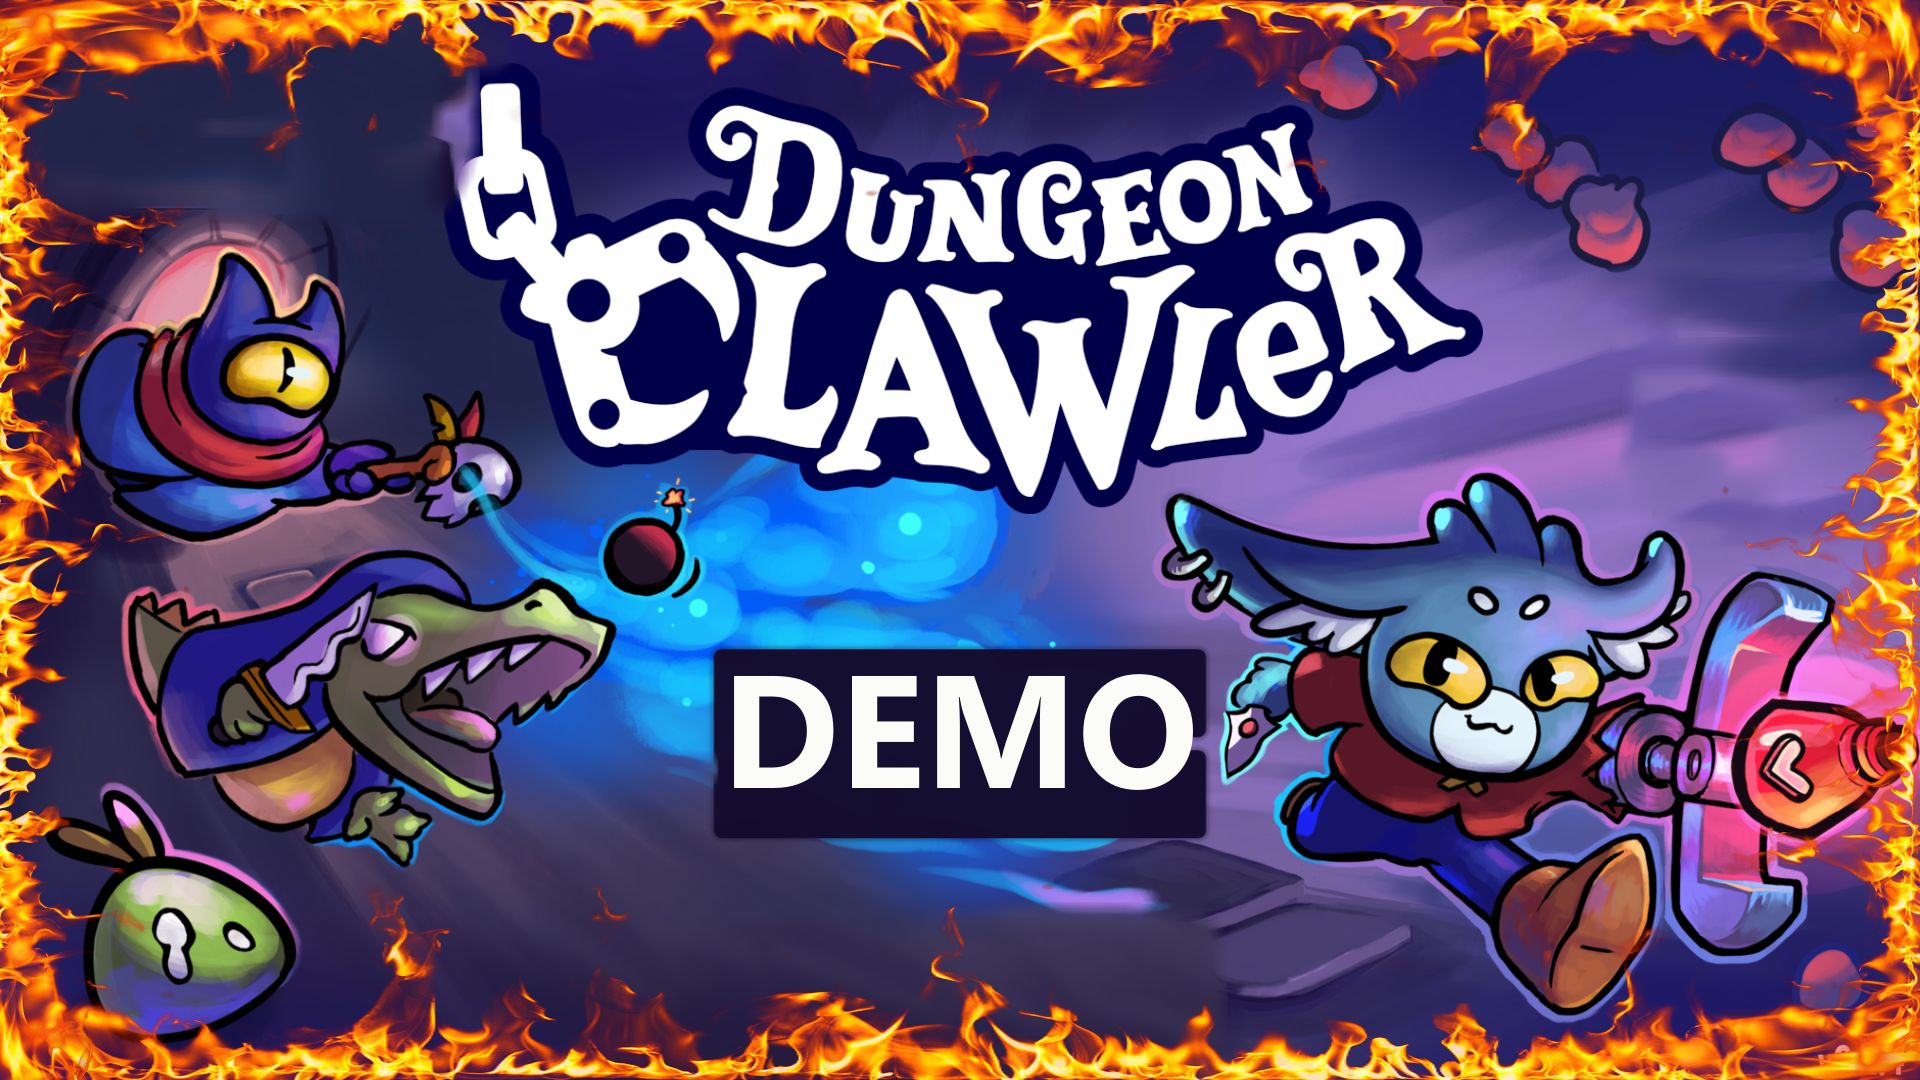 Dungeon Clawler Demo Review